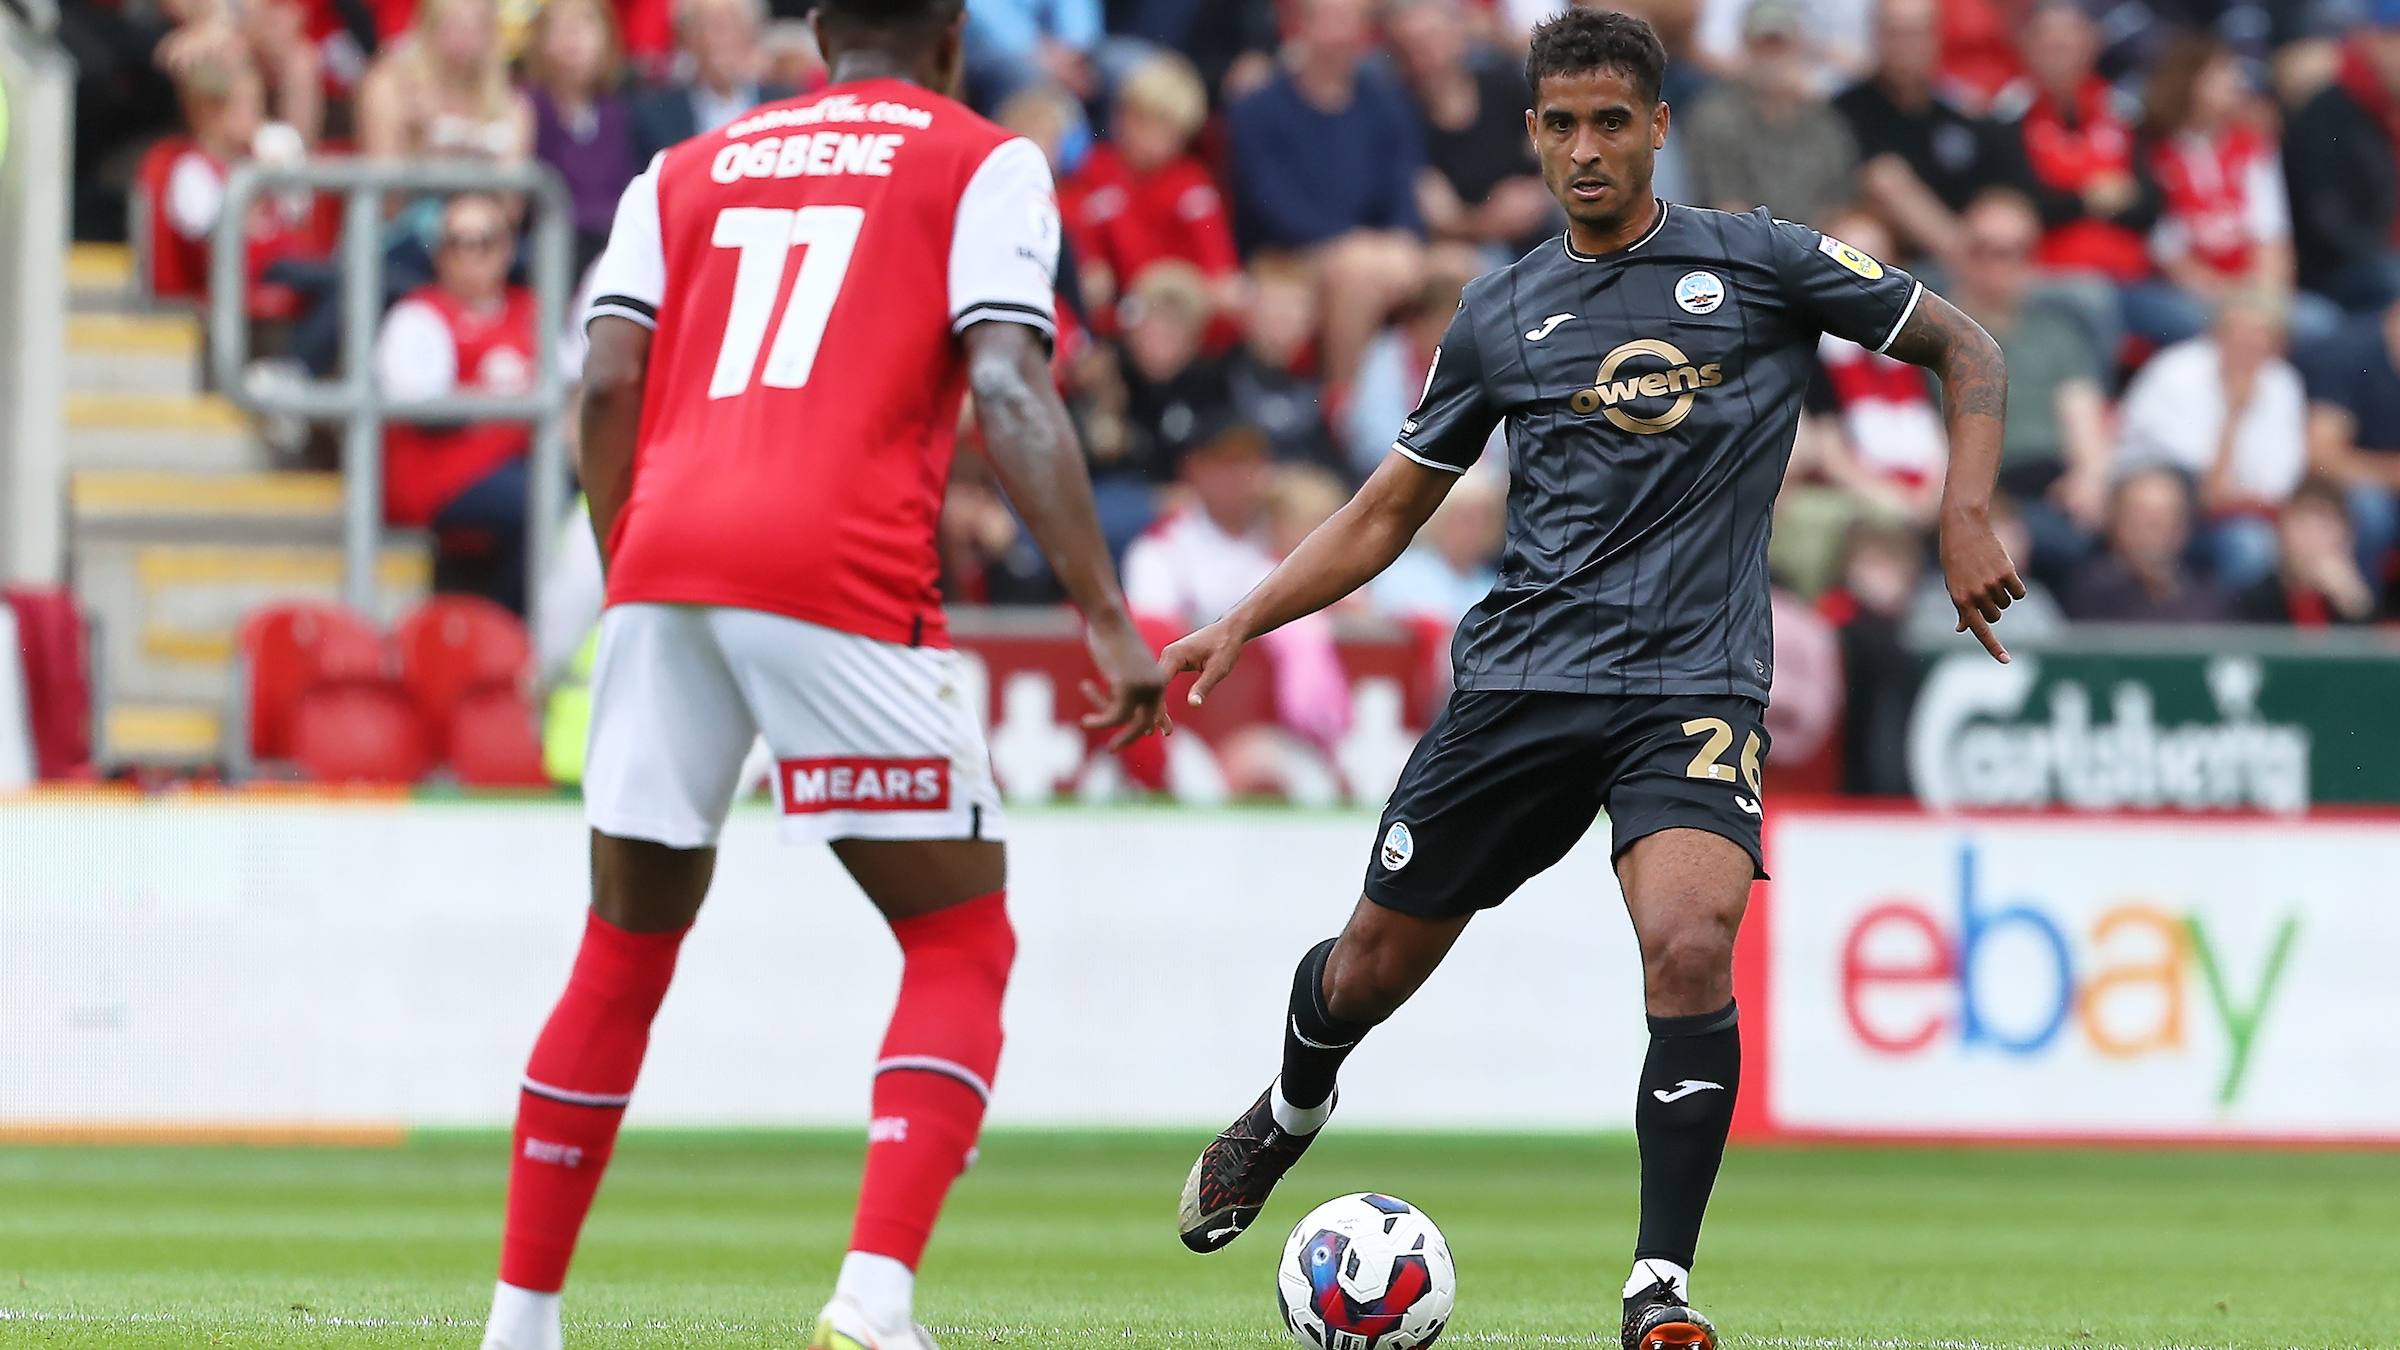 Kyle Naughton on the ball under pressure from a Rotherham player. 